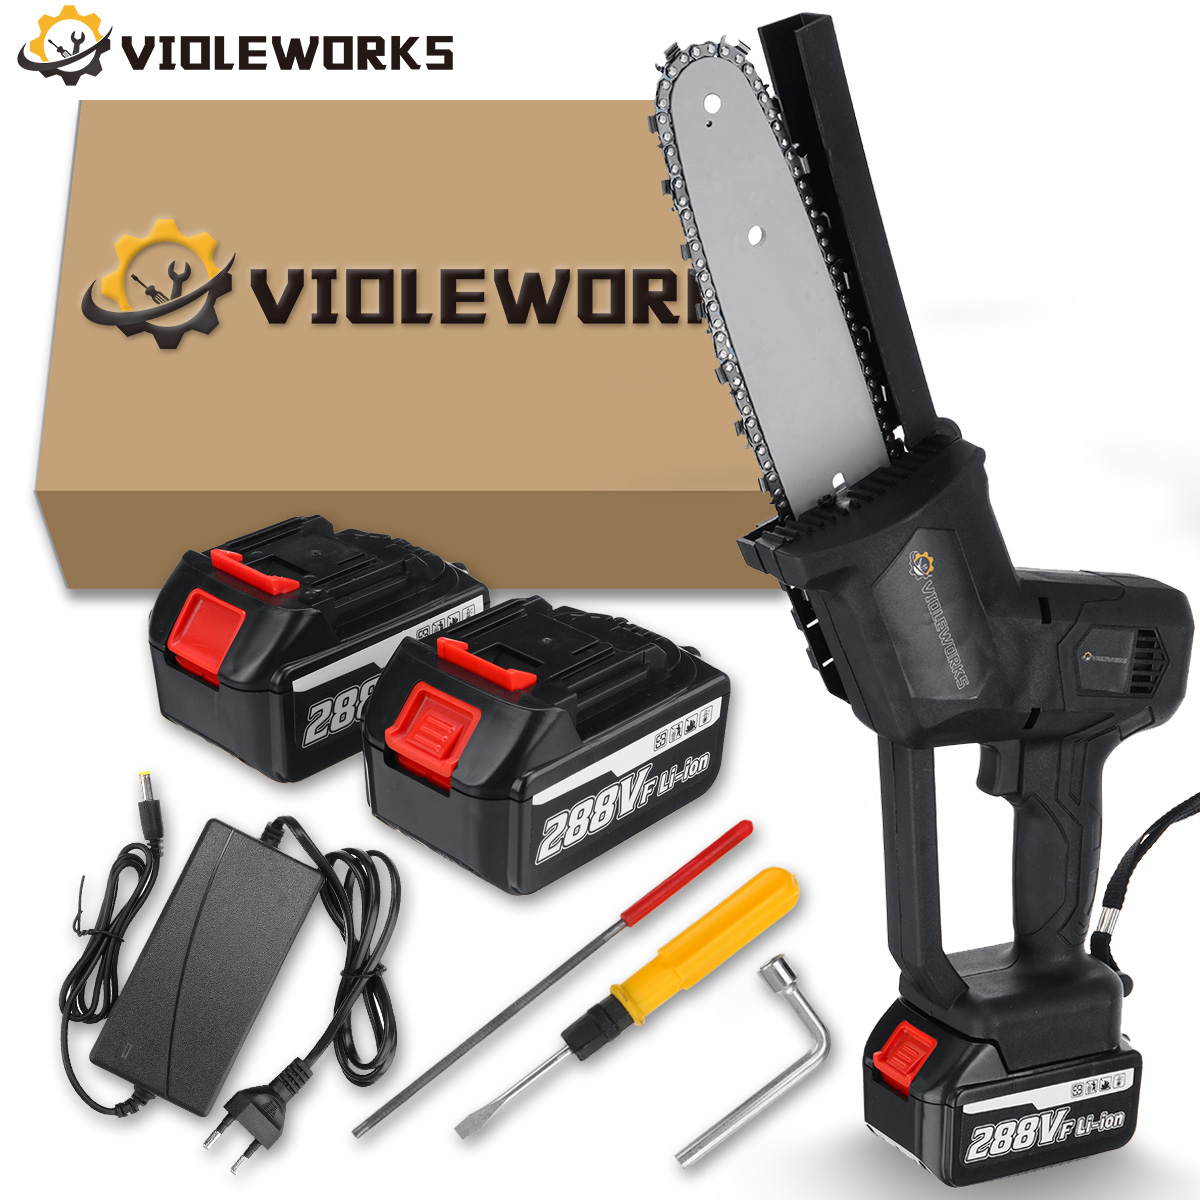 VIOLEWORKS-288VF-Cordless-Electric-Chain-Saw-One-Hand-Saw-Woodworking-Tool-W-None1pc2pcs-Battery-Als-1829028-6